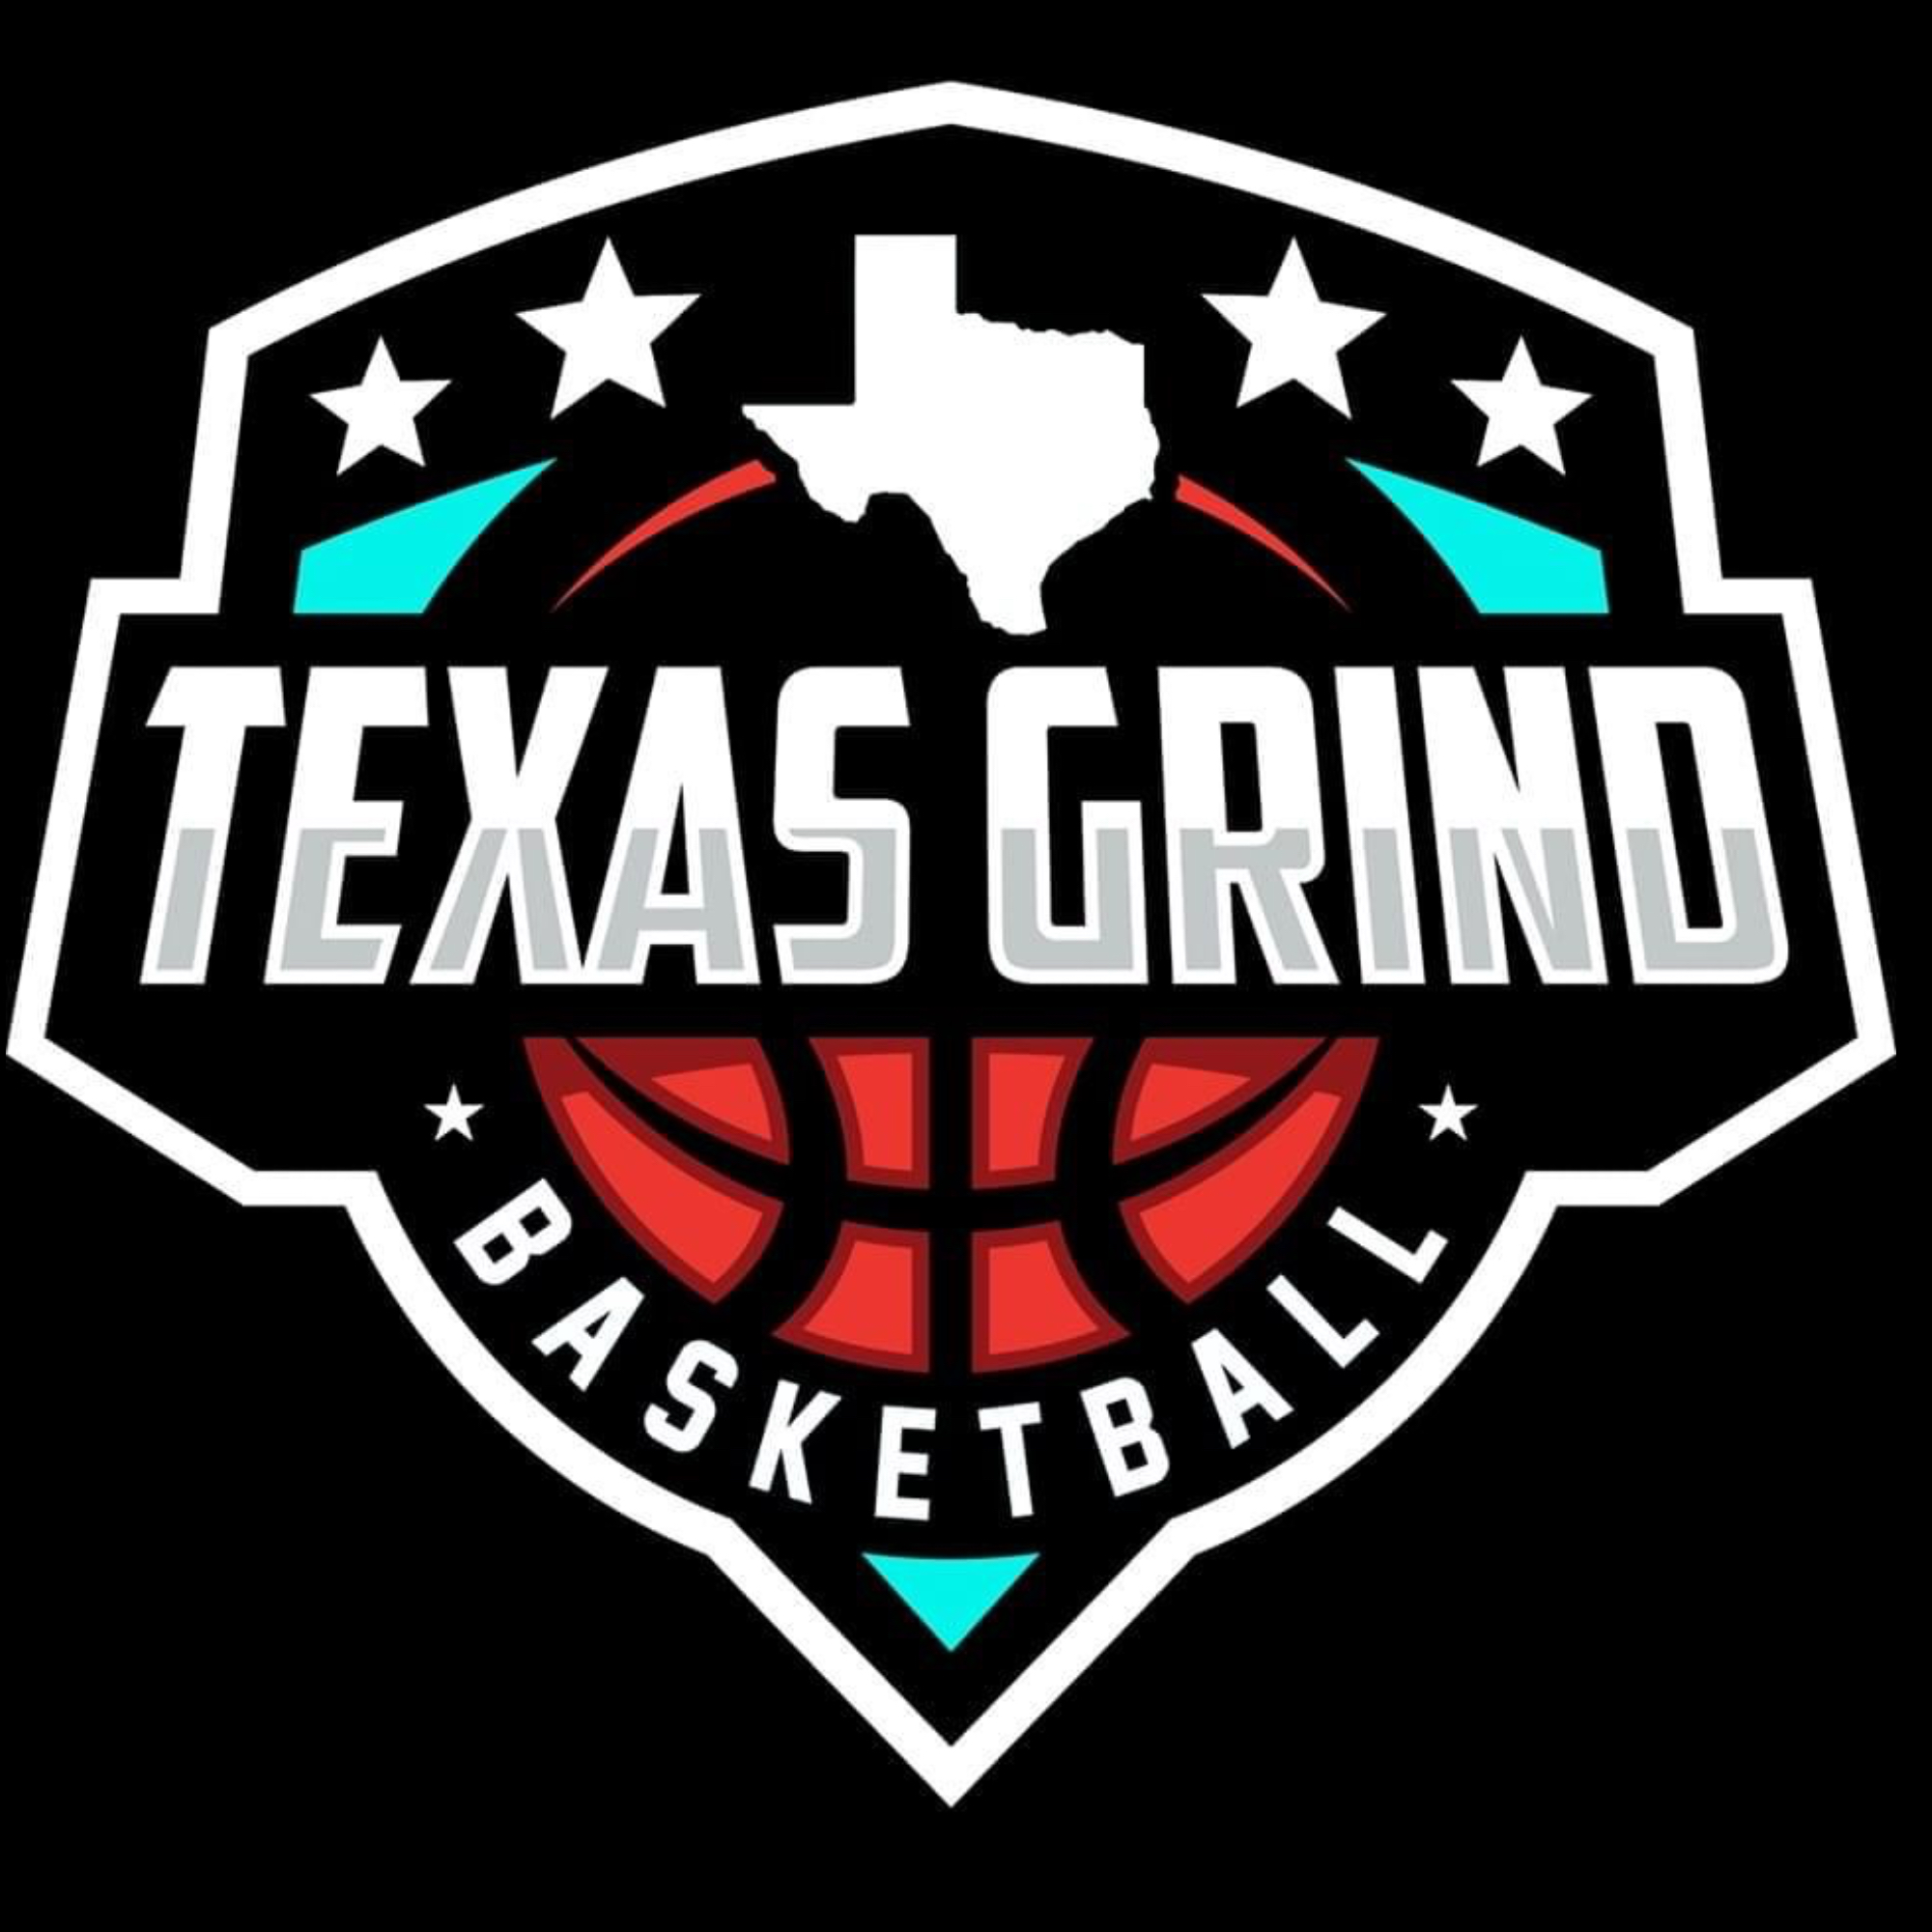 The official logo of Texas Grind